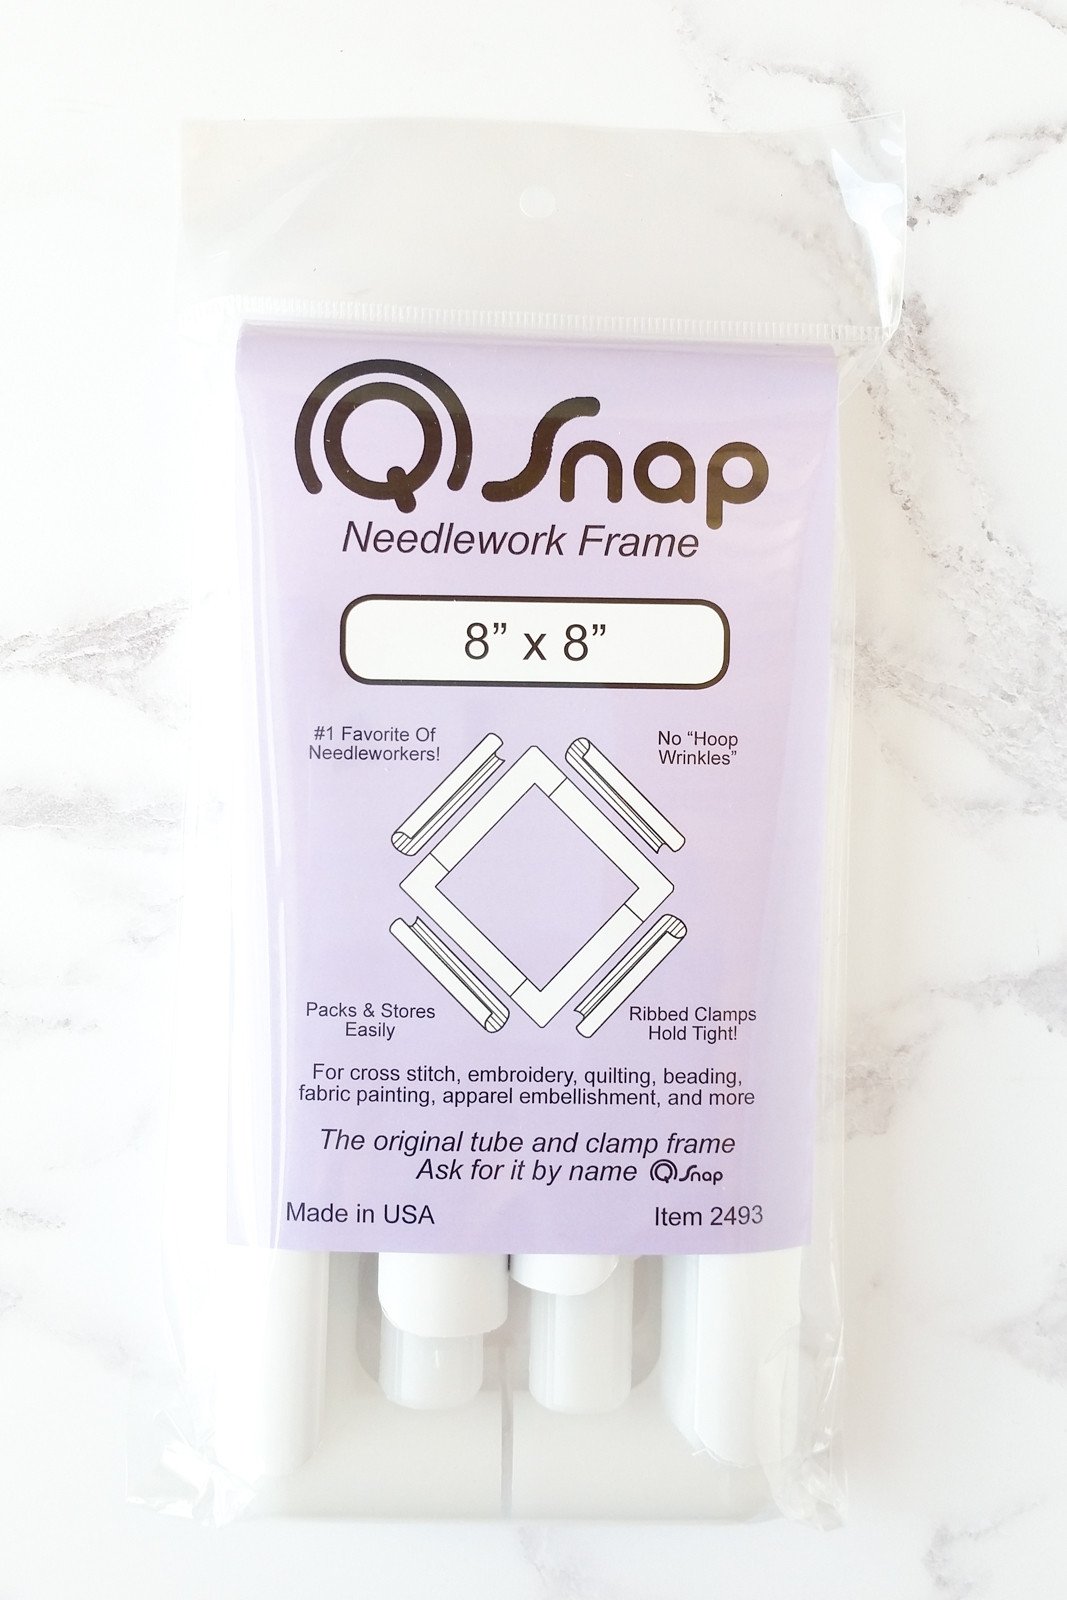 Q Snap 6 needlework frame cross stitch quilting embroidery frame Q-Snap  Qsnap